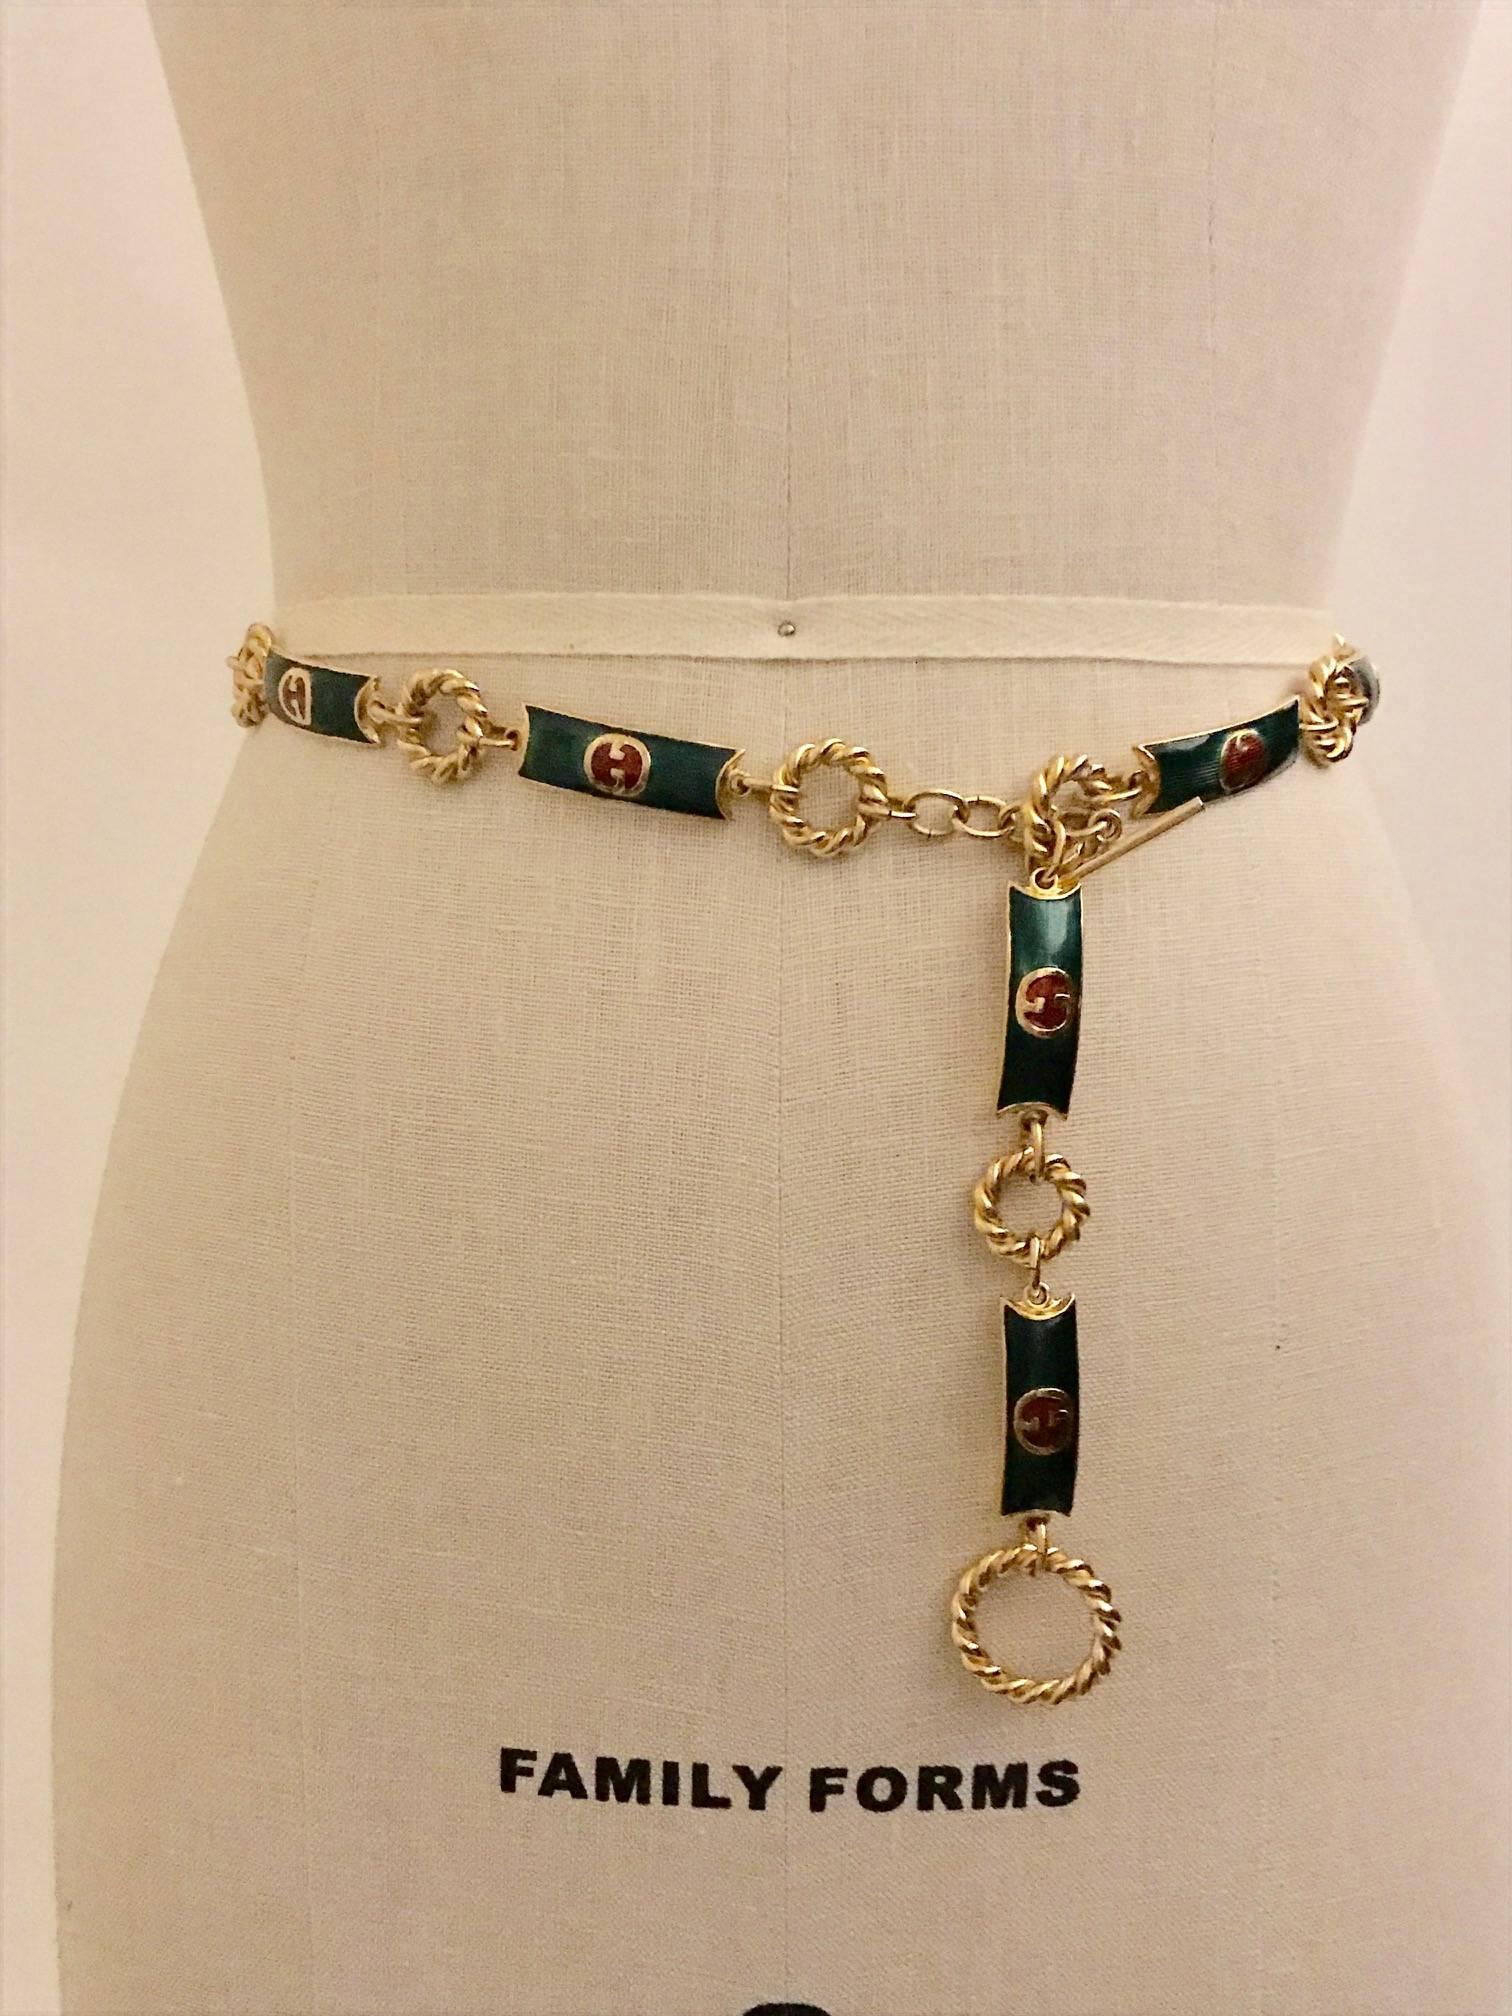 Gucci early 1970s gold tone chain link belt with enamel GG logo adornments. Can also be styled to be worn as a Y necklace.

Signed 'Made in Italy' and 'GUCCI' at adjustable toggle closure. 

Adjustable, fits waist size up to 27